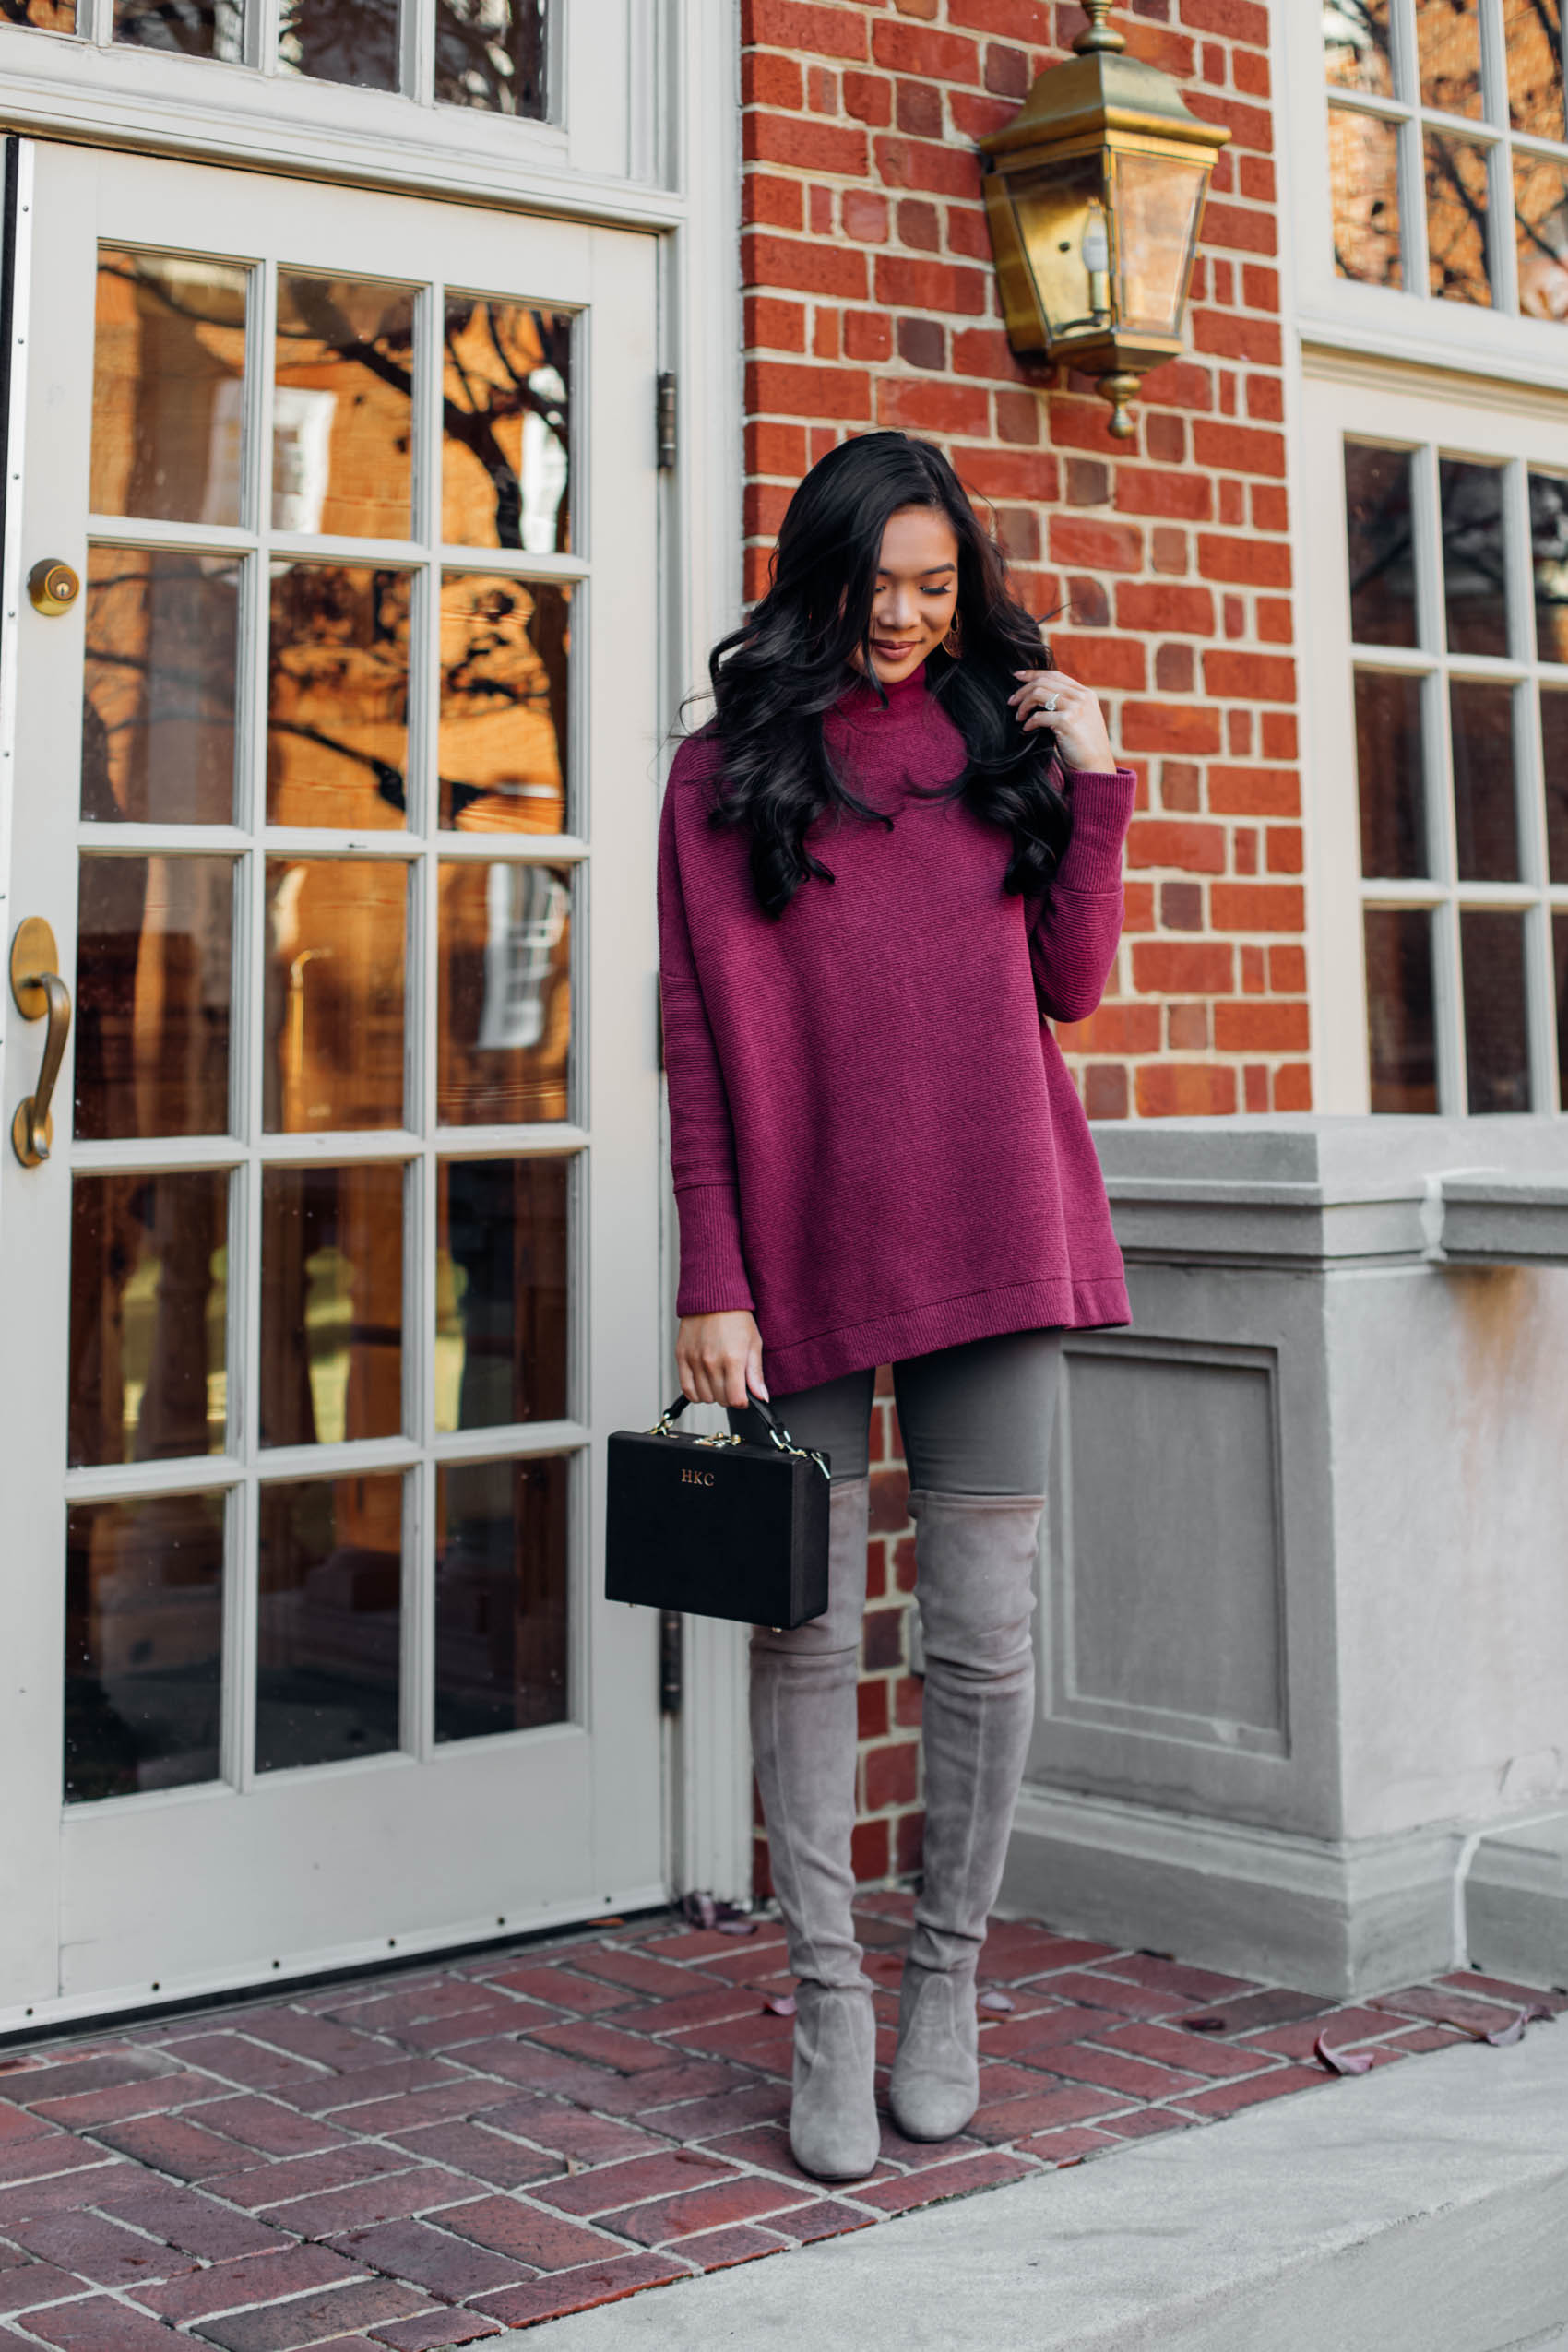 Blogger Hoang-Kim wears a oversized tunic sweater with over the knee boots